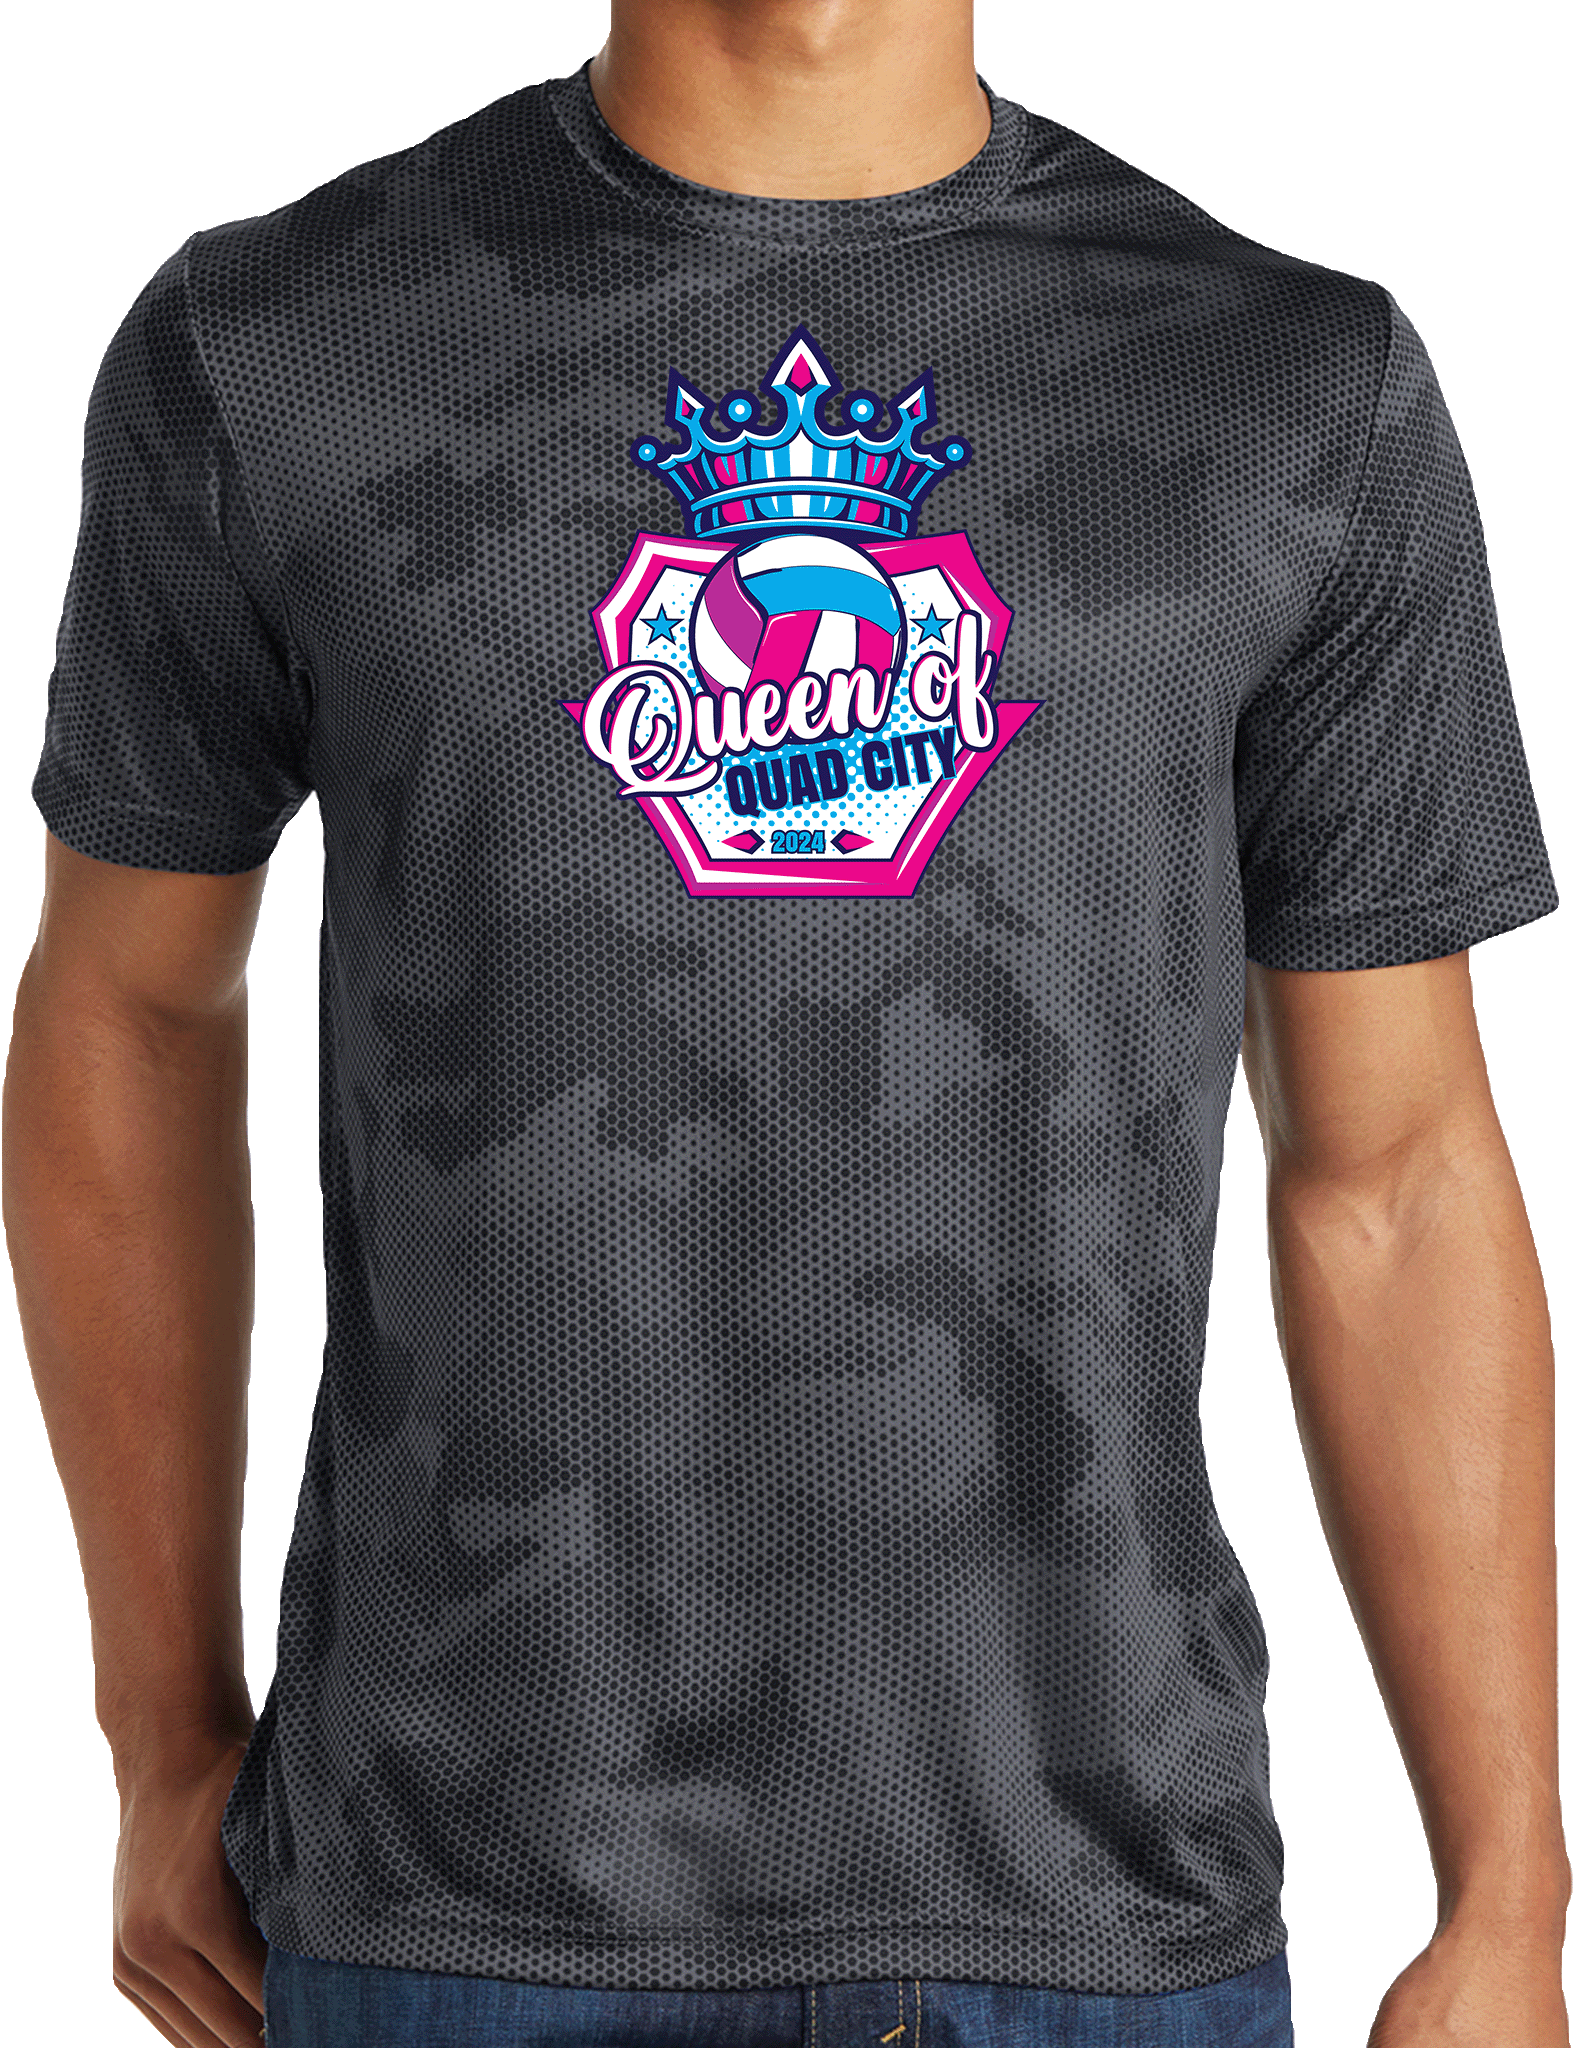 Performance Shirts - 2024 Queen Of Quad City